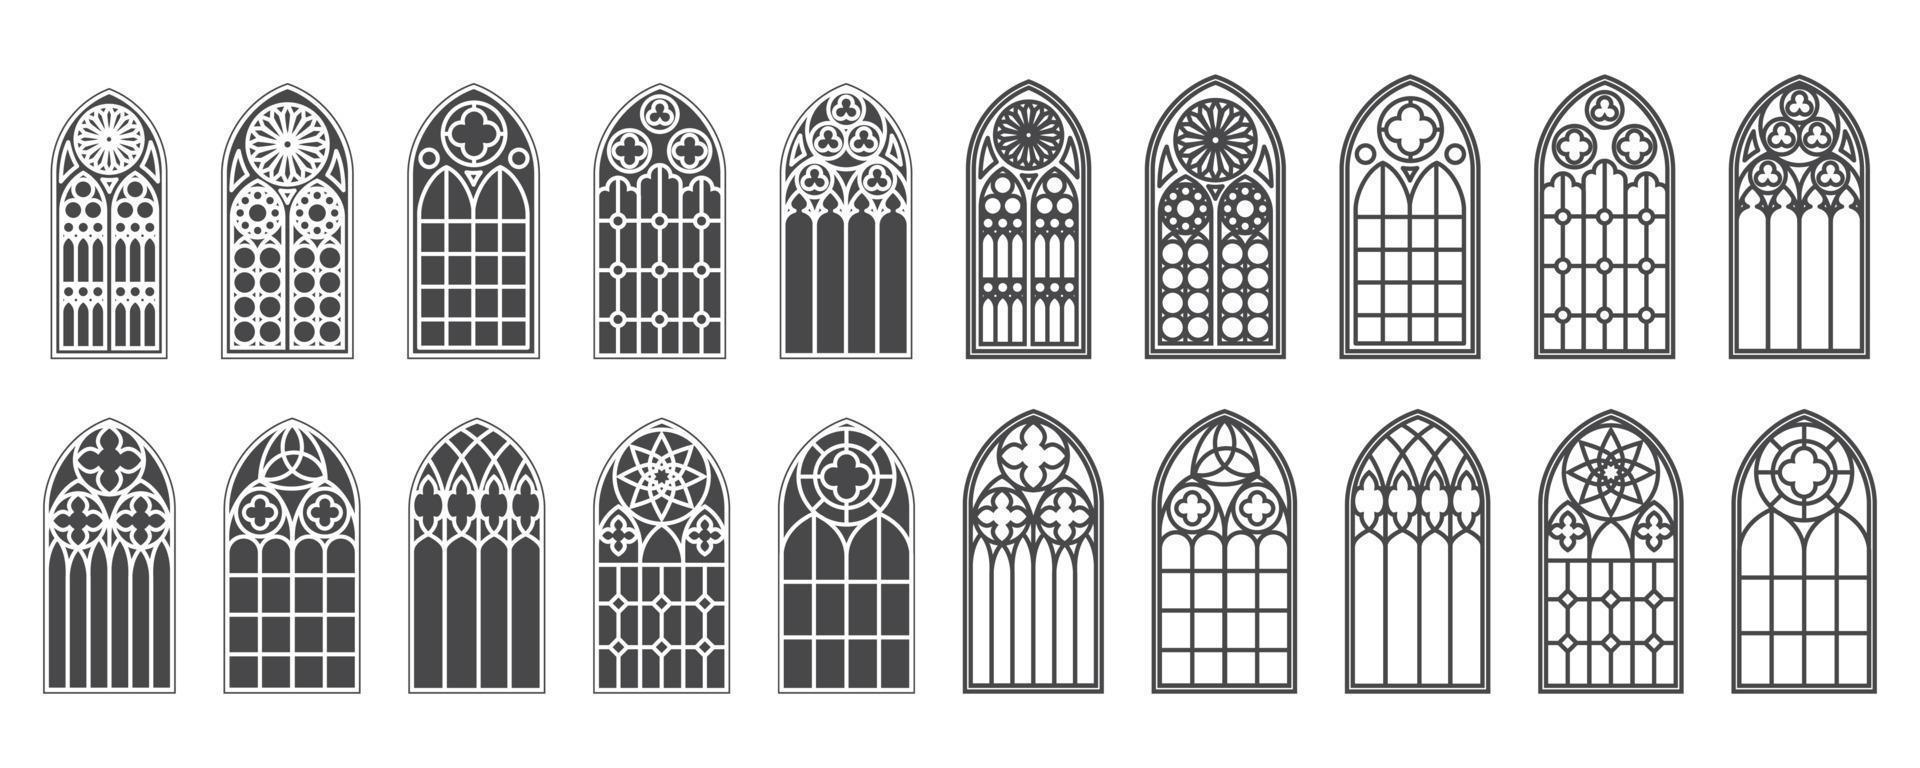 Church windows set. Silhouettes of gothic arches in line and glyph classic style. Old cathedral glass frames. Medieval interior elements. Vector